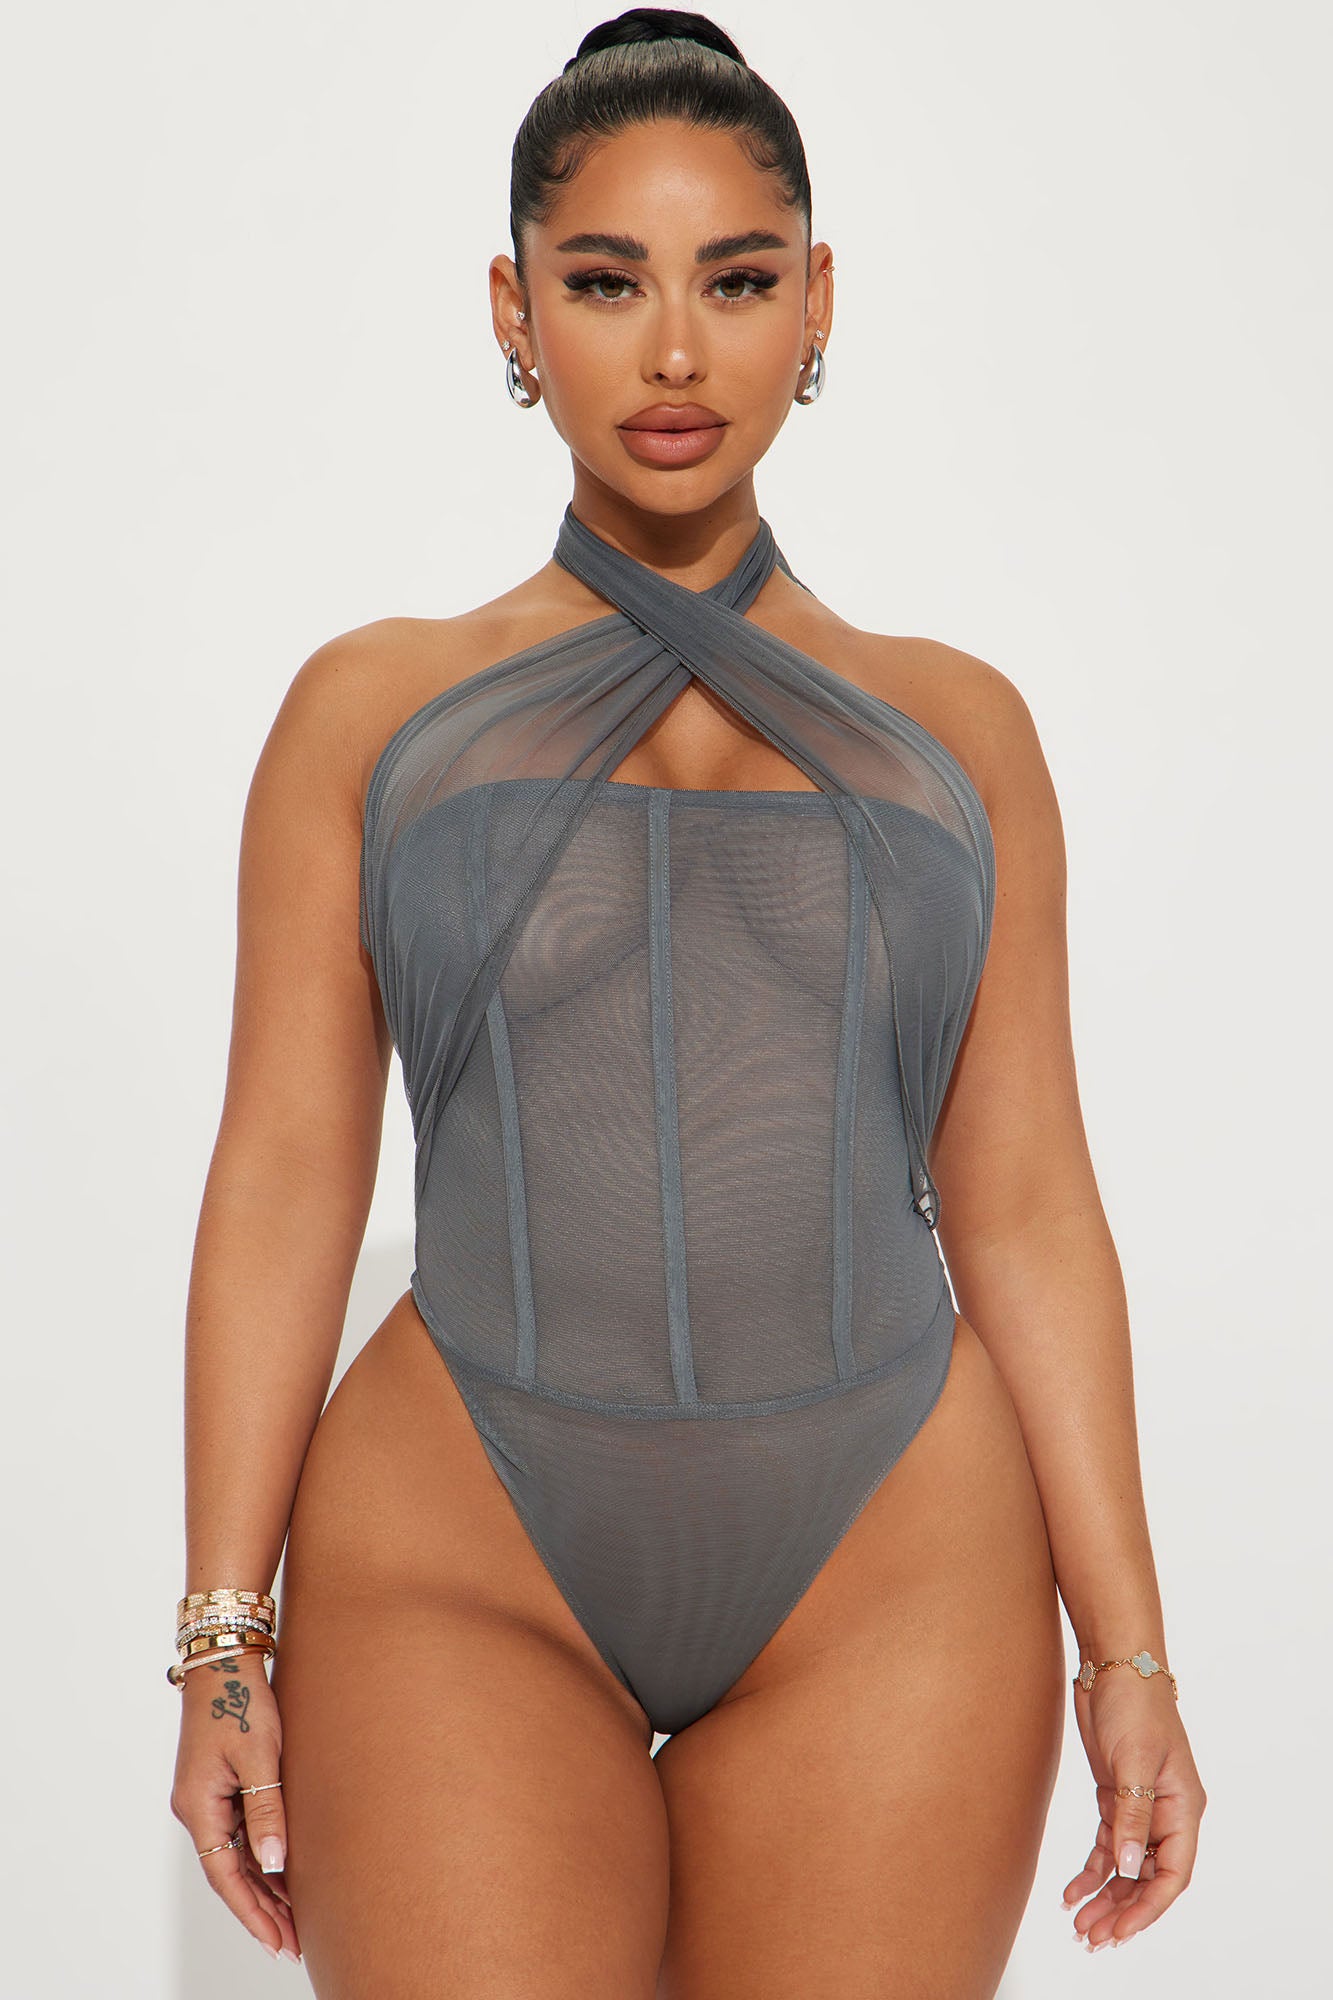 Plus Size Mesh Bodysuit – For Your Life Style